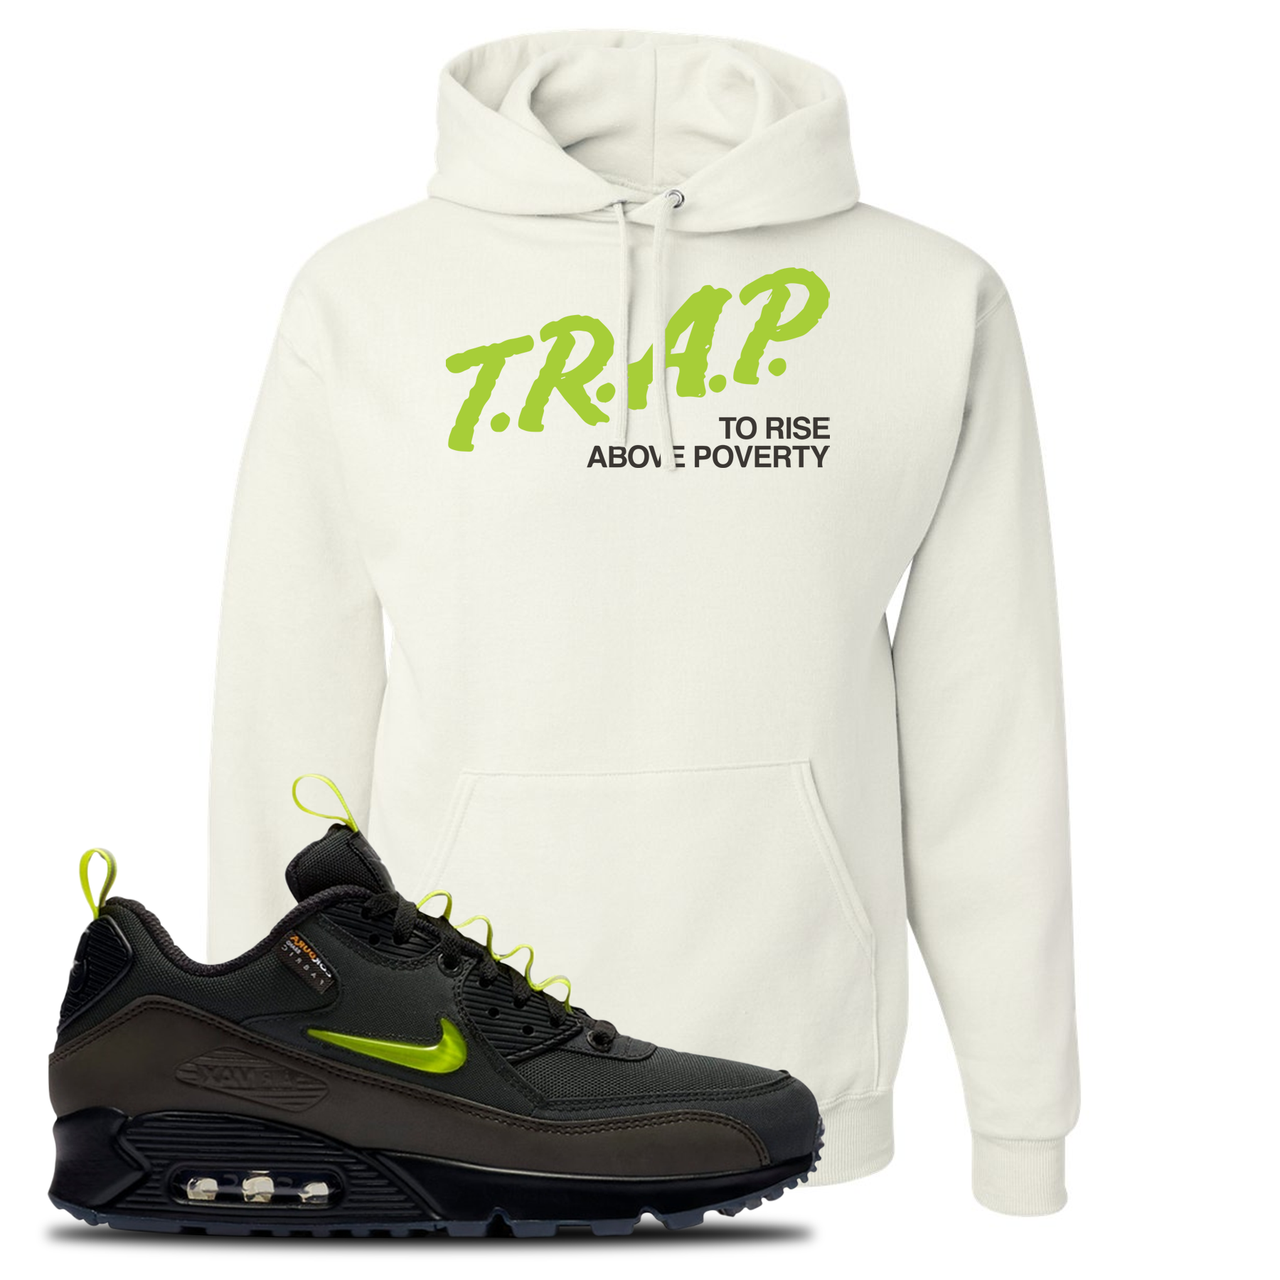 The Basement X Air Max 90 Manchester Trap to Rise Above Poverty White Sneaker Hook Up Pullover Hoodie